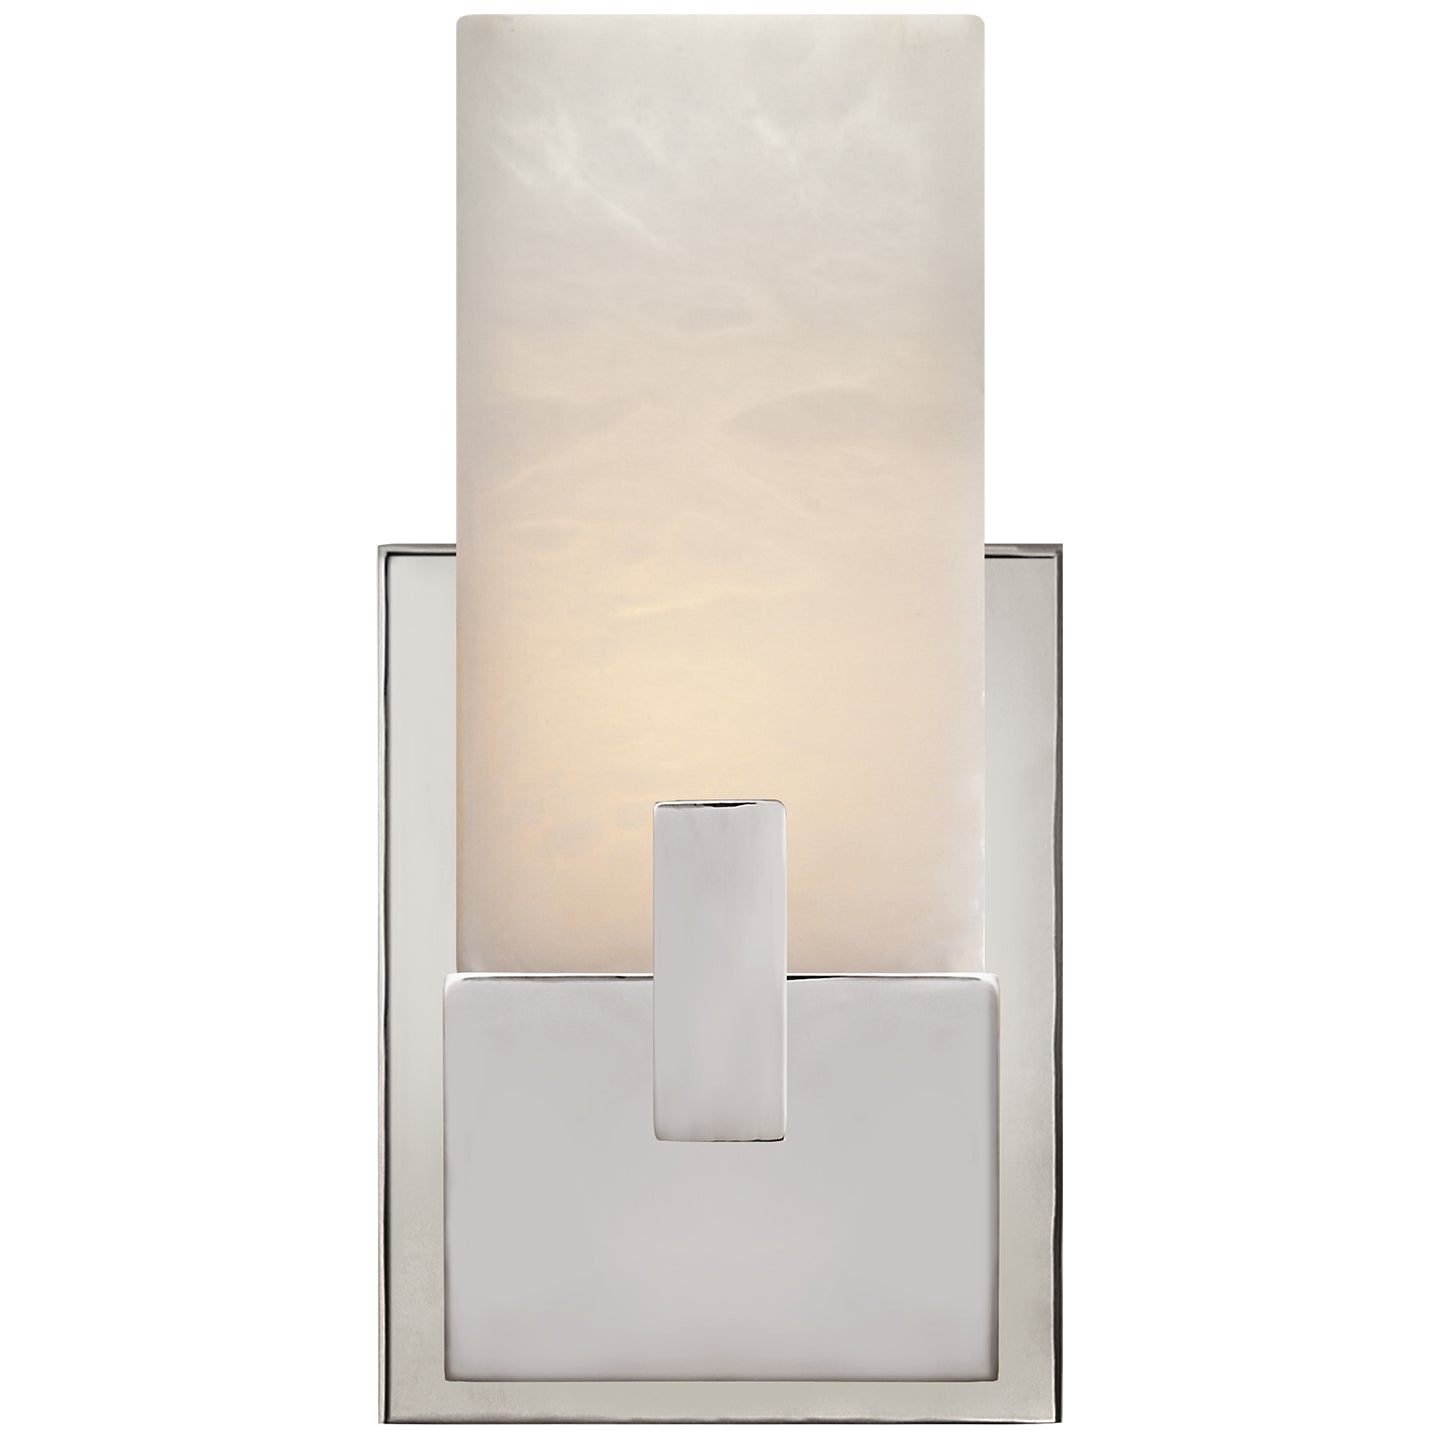 Load image into Gallery viewer, Visual Comfort Signature - KW 2113PN-ALB - LED Bath Sconce - Covet - Polished Nickel
